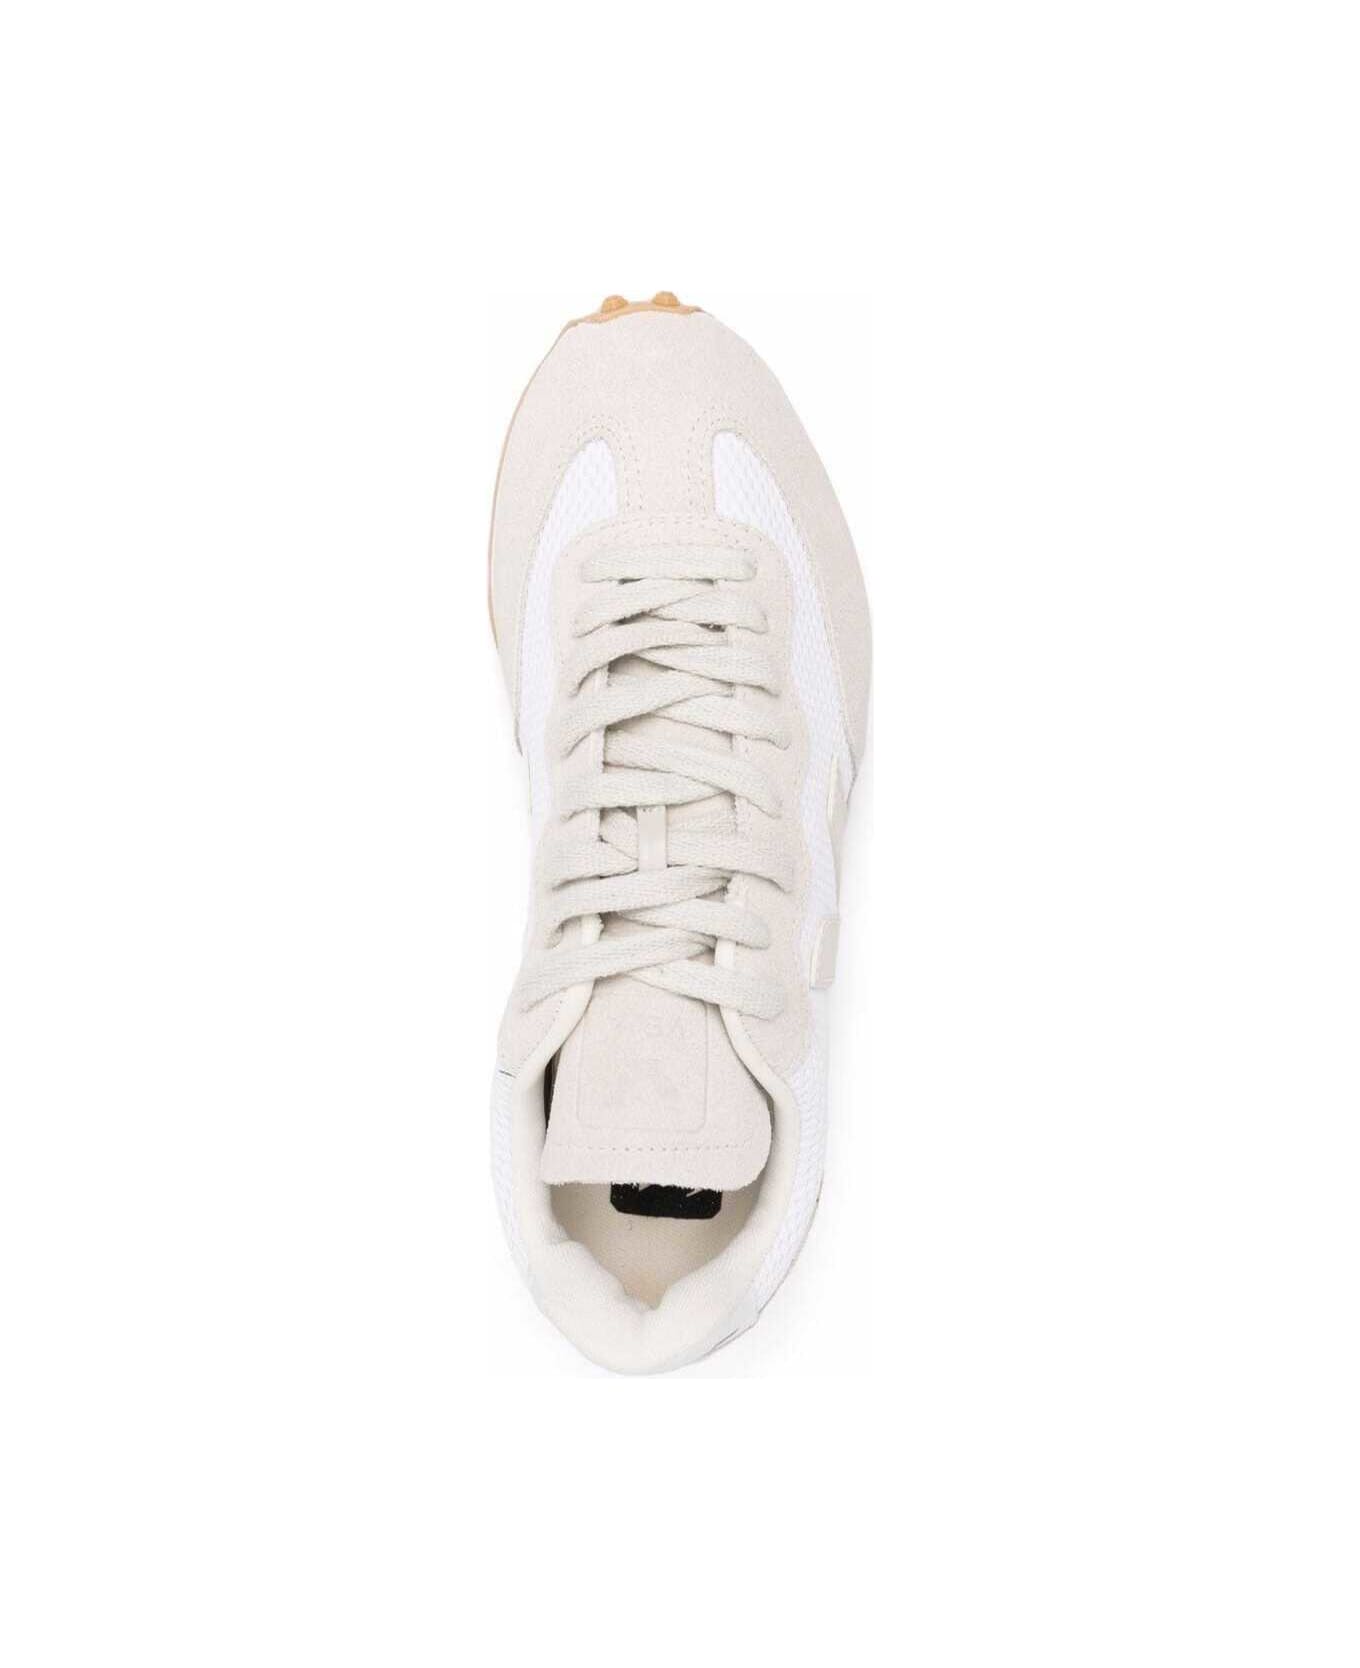 Veja Alveo Recycled Fabric And Suede Sneakers - White Natural